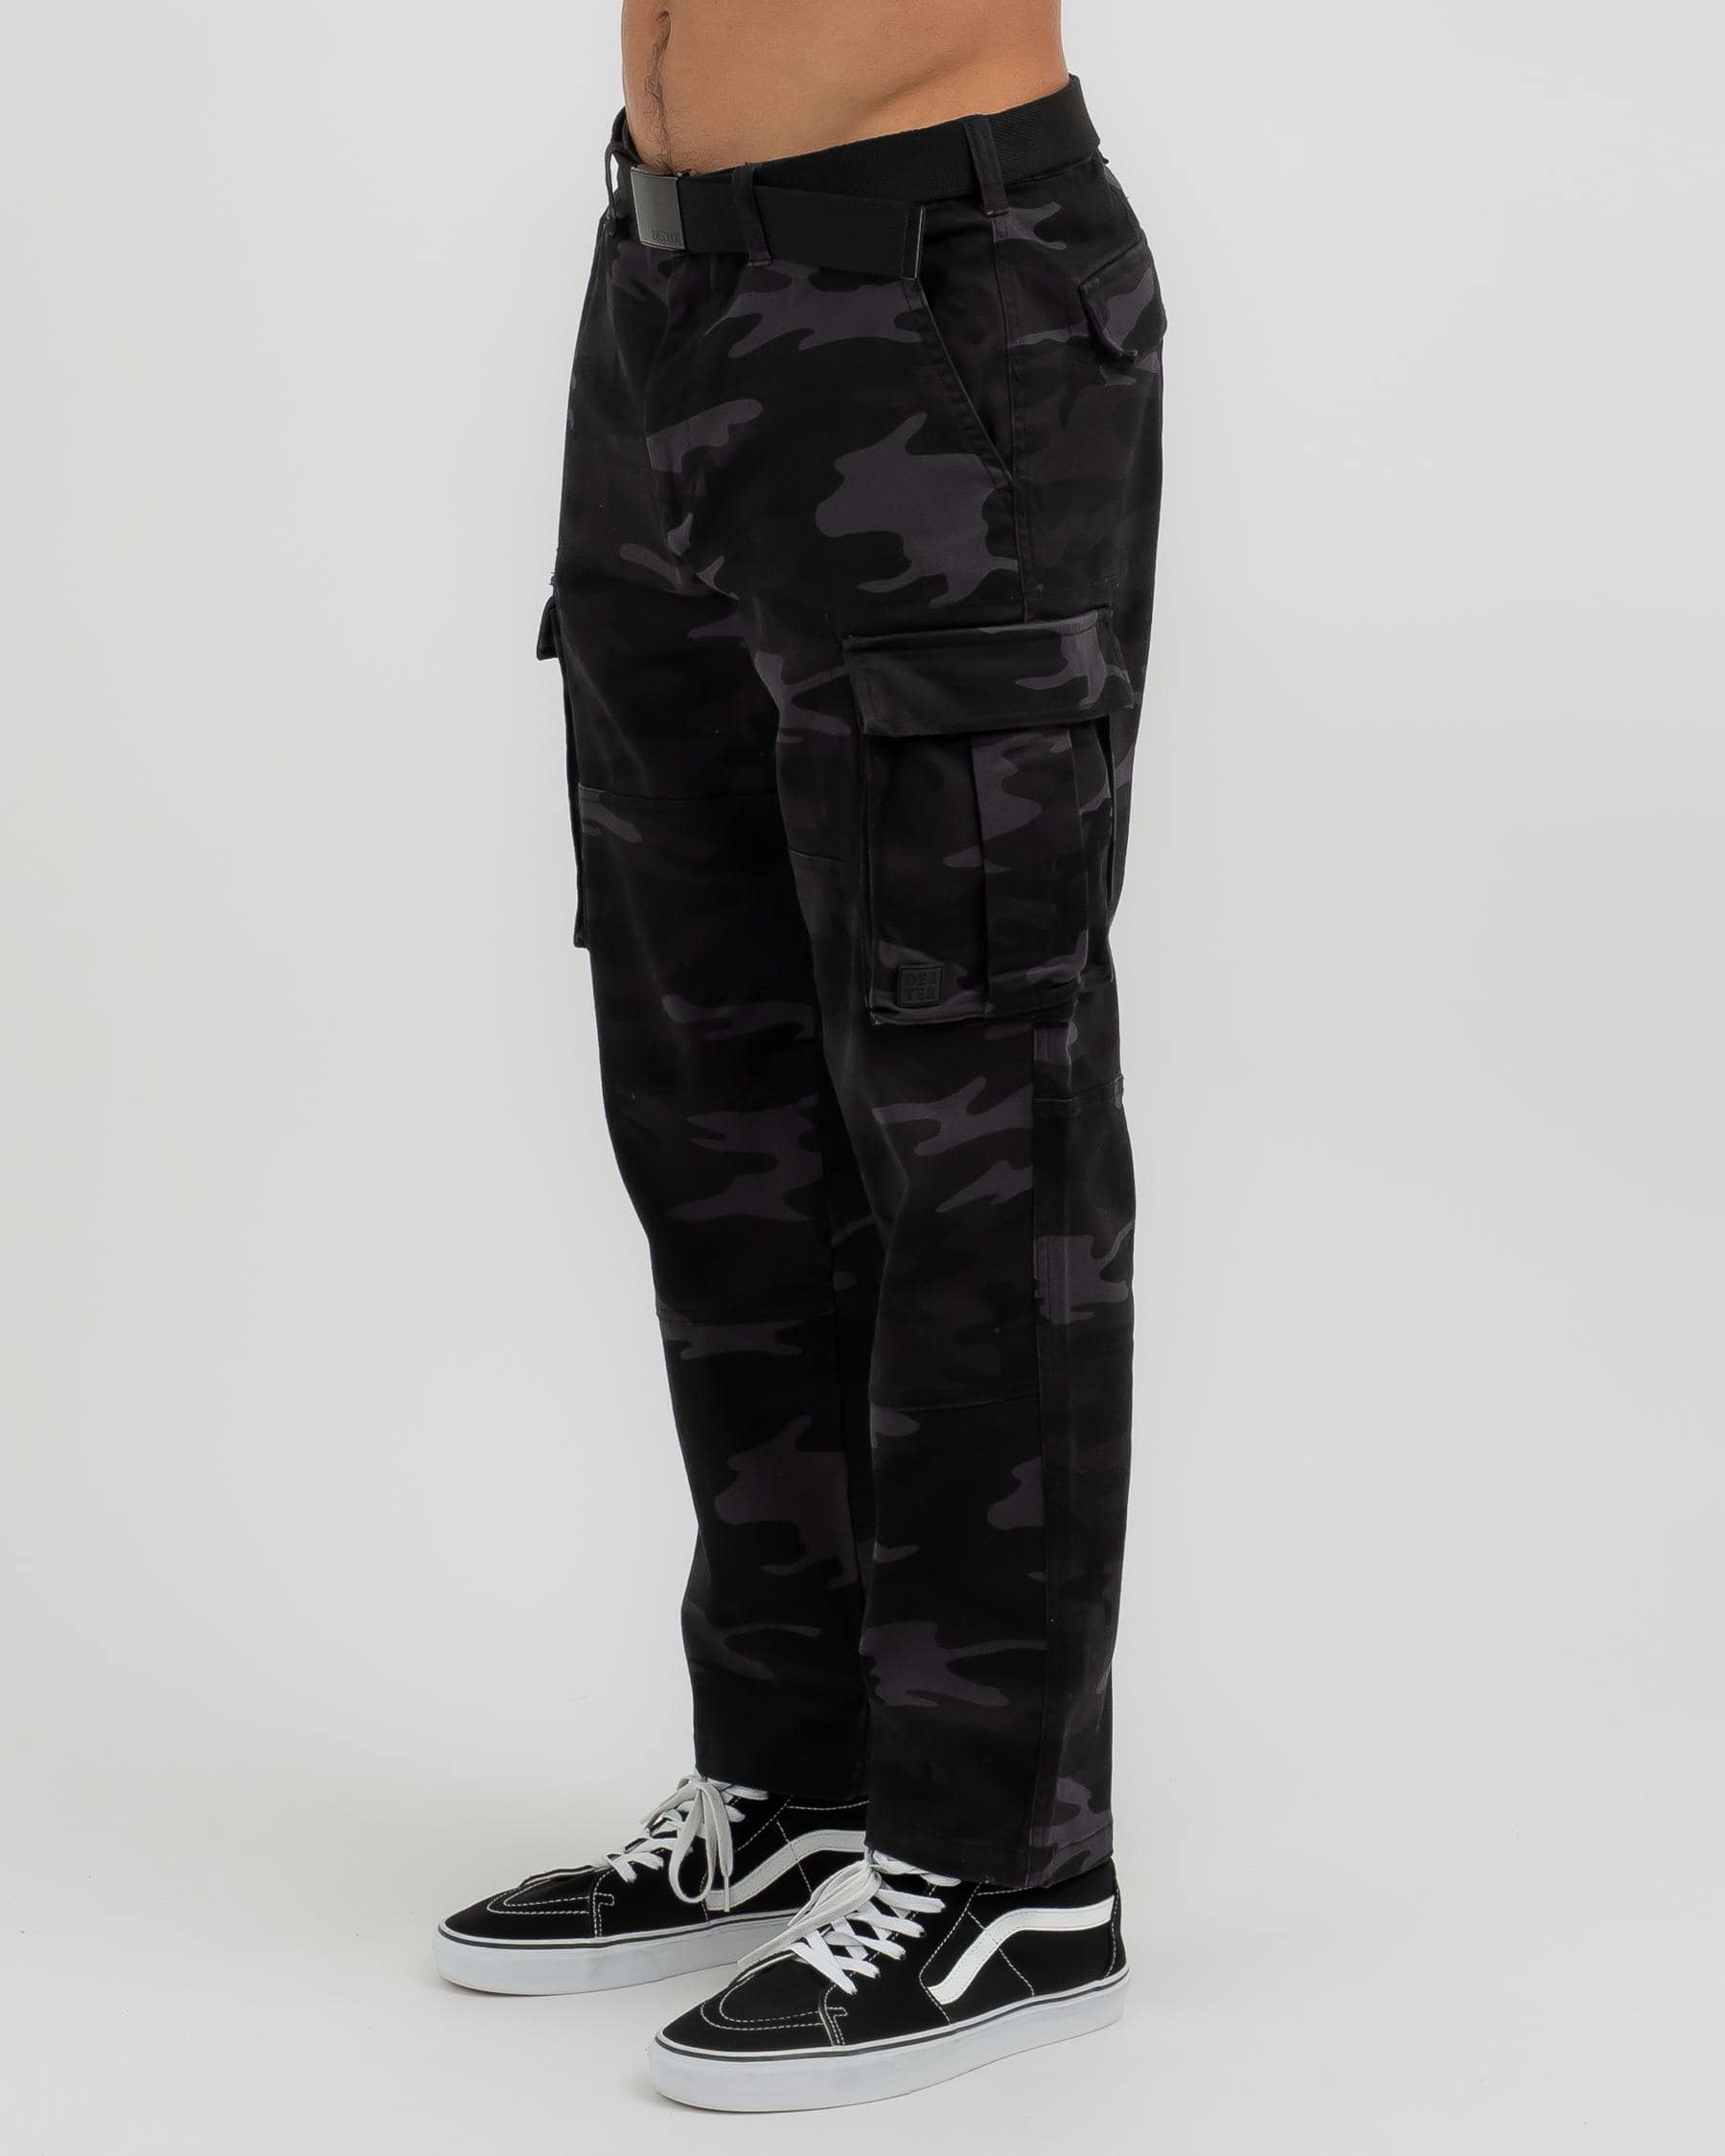 Shop Dexter Annihilate Cargo Pants In Black Camo - Fast Shipping & Easy ...